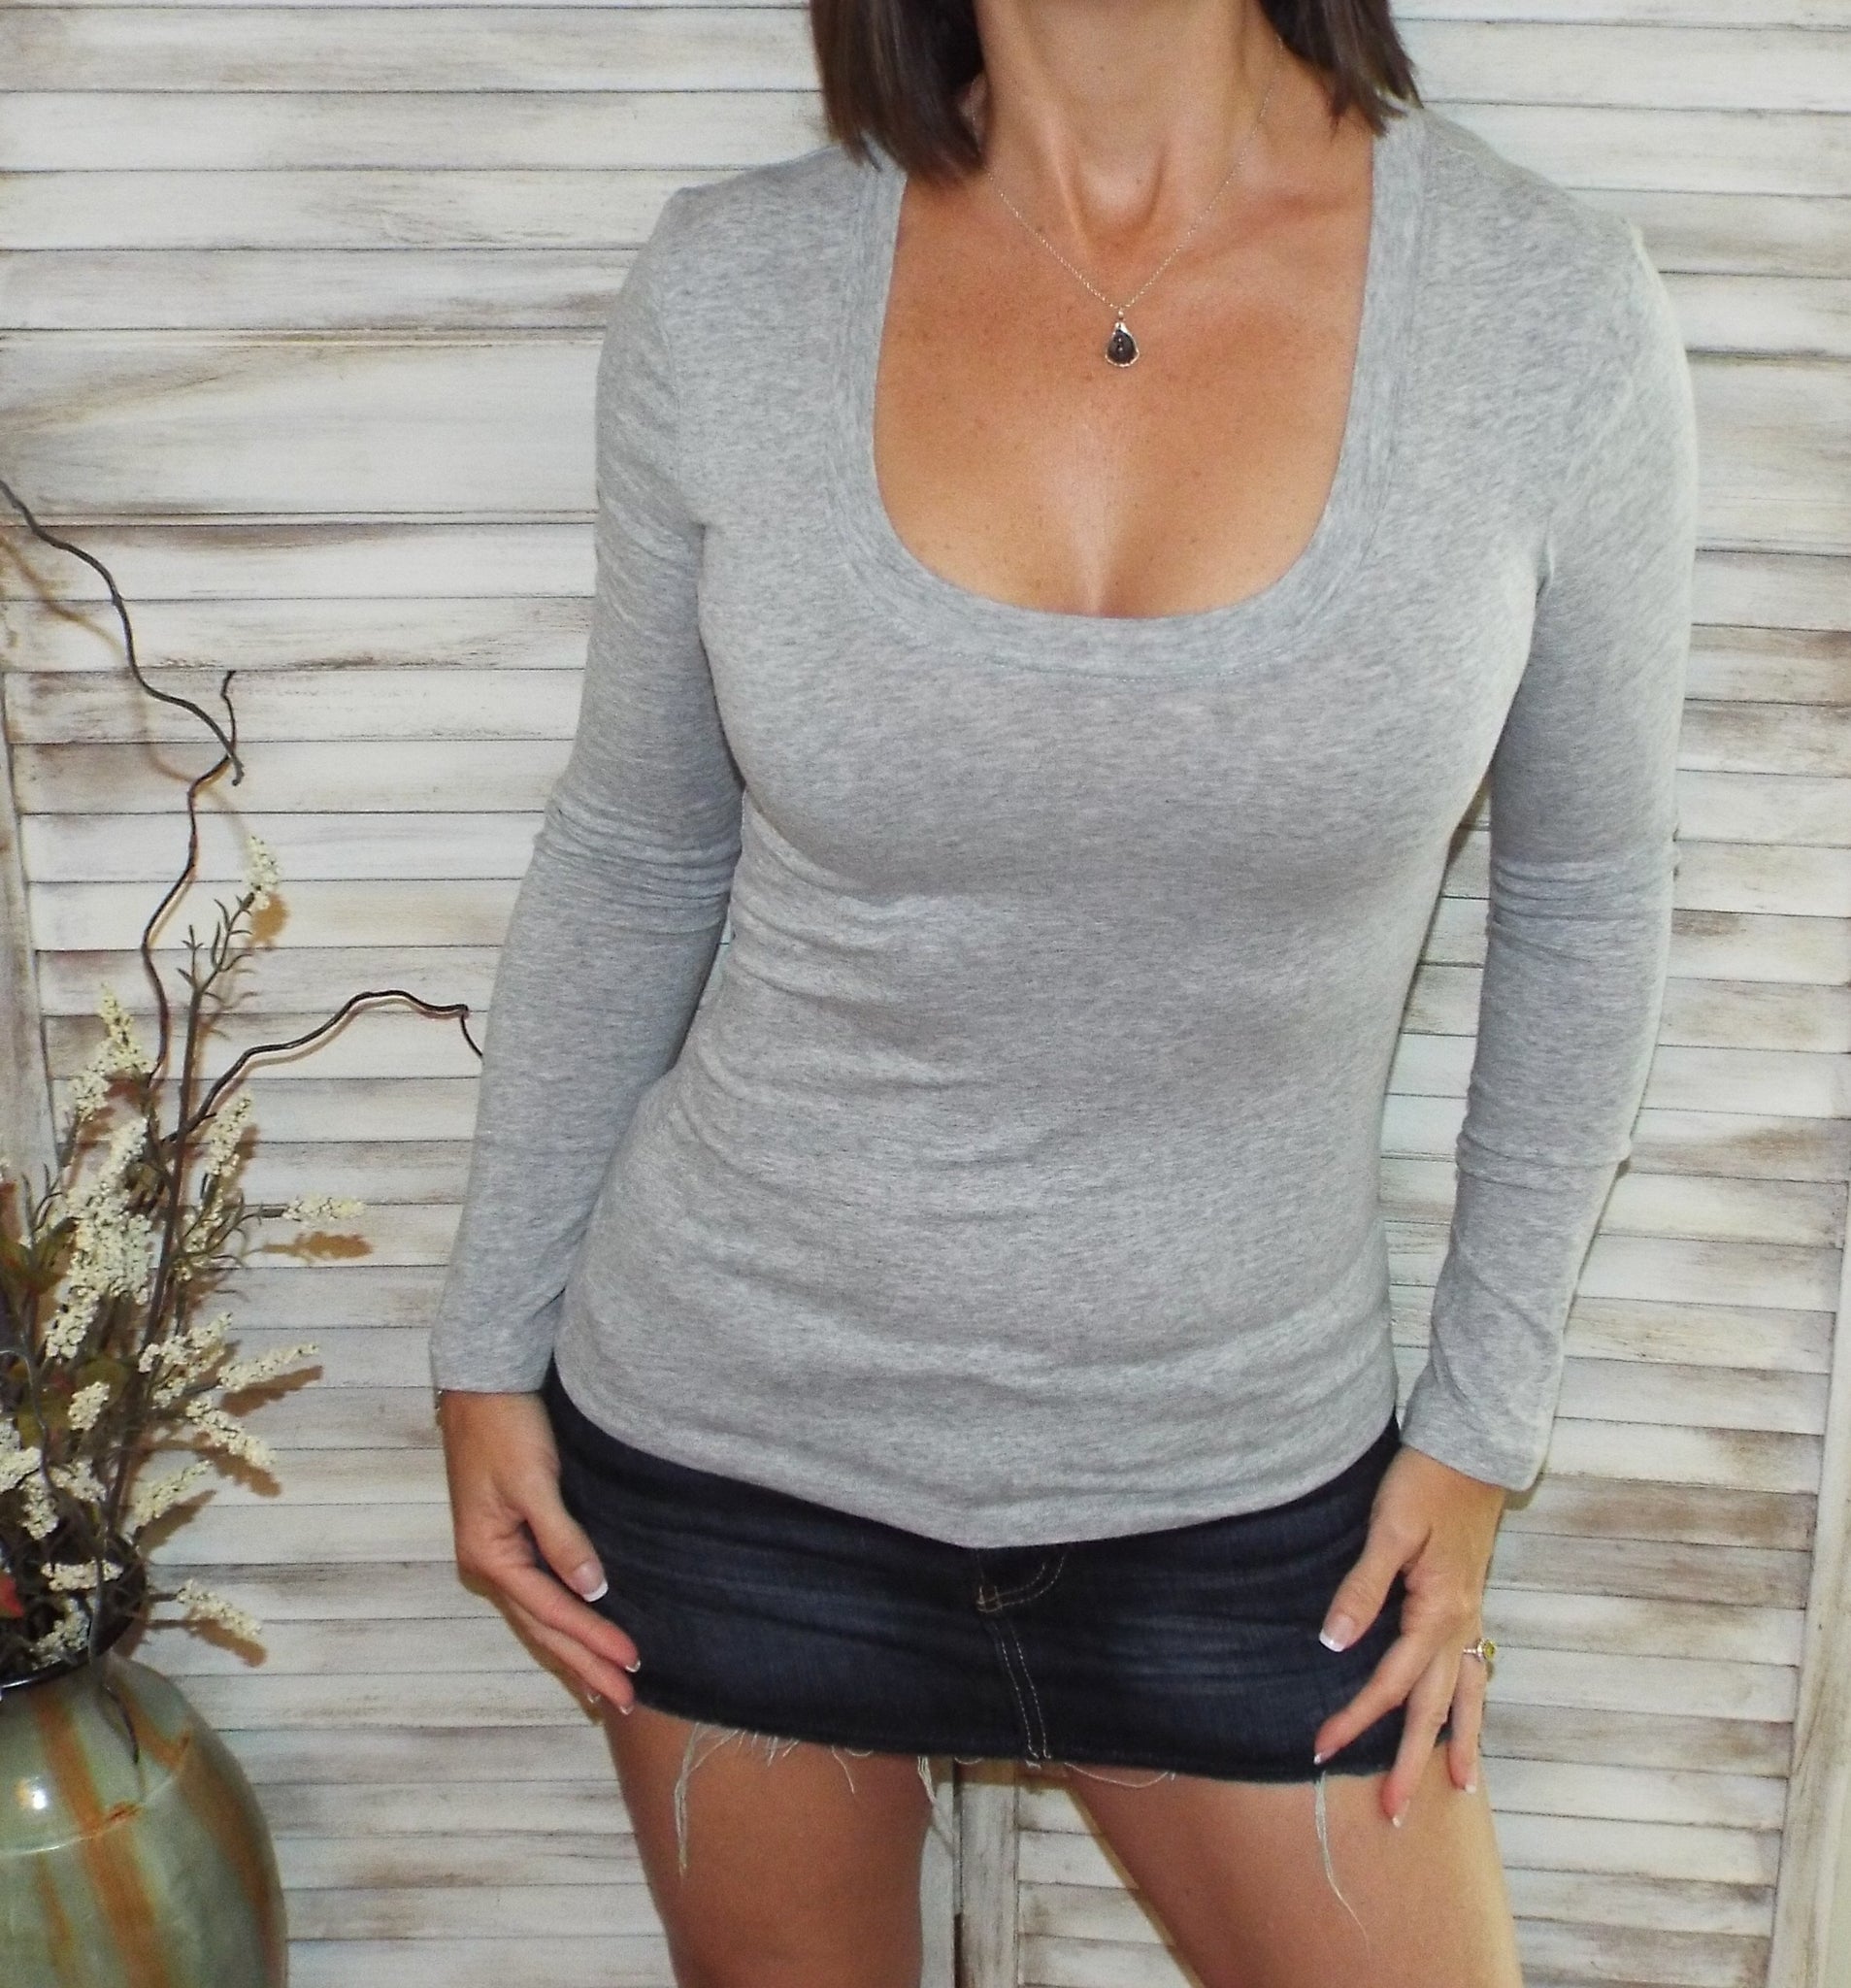 “Easygoing” Slimming Scoop Neck Low Cut L/S Tissue Basic Baby Shirt Top Gray 1X/2X/3X